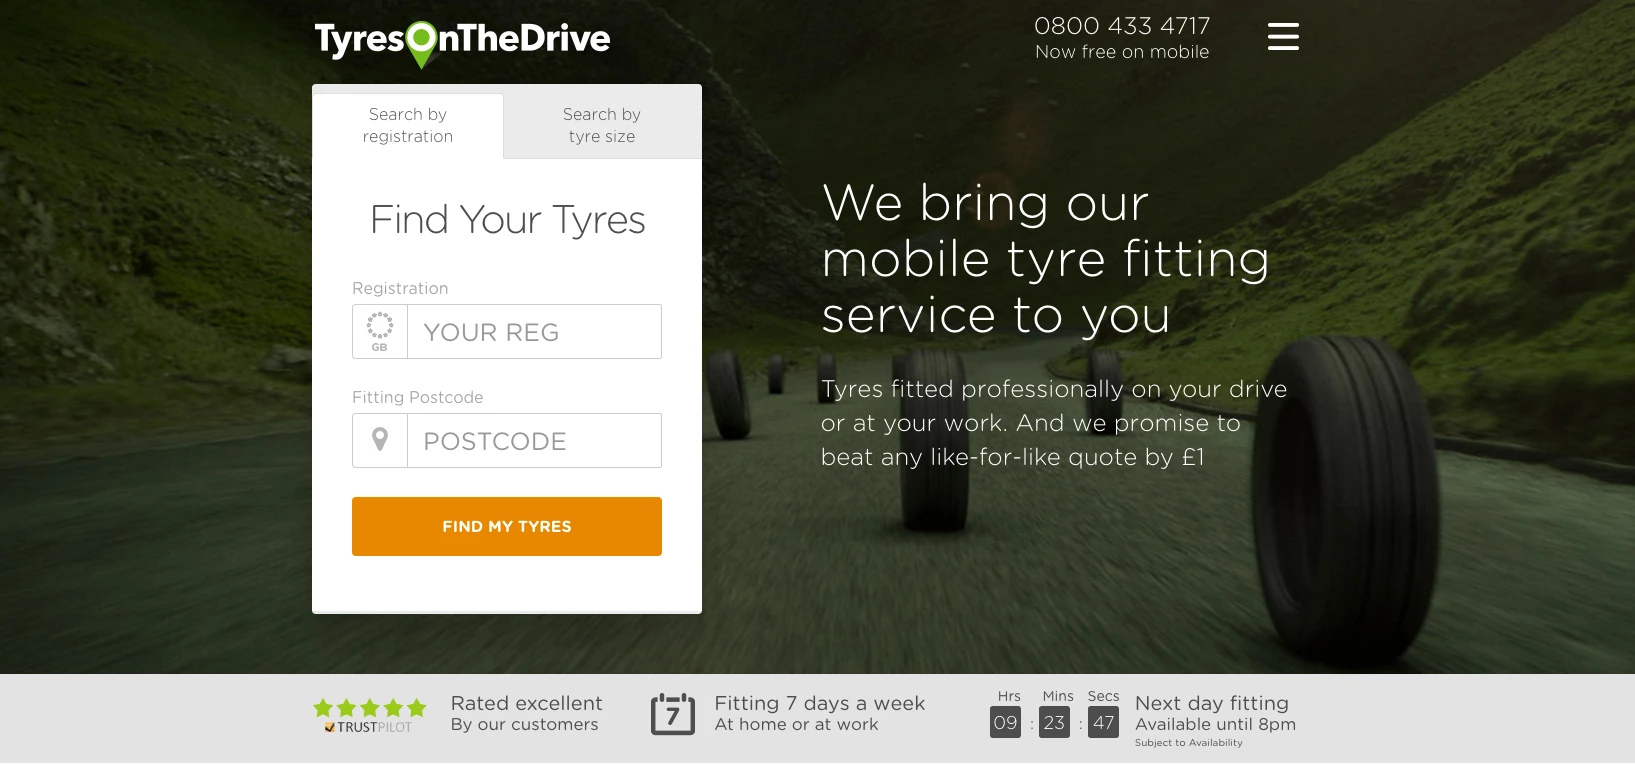 TyresOnTheDrive.com has closed an investment round worth up to £8m.